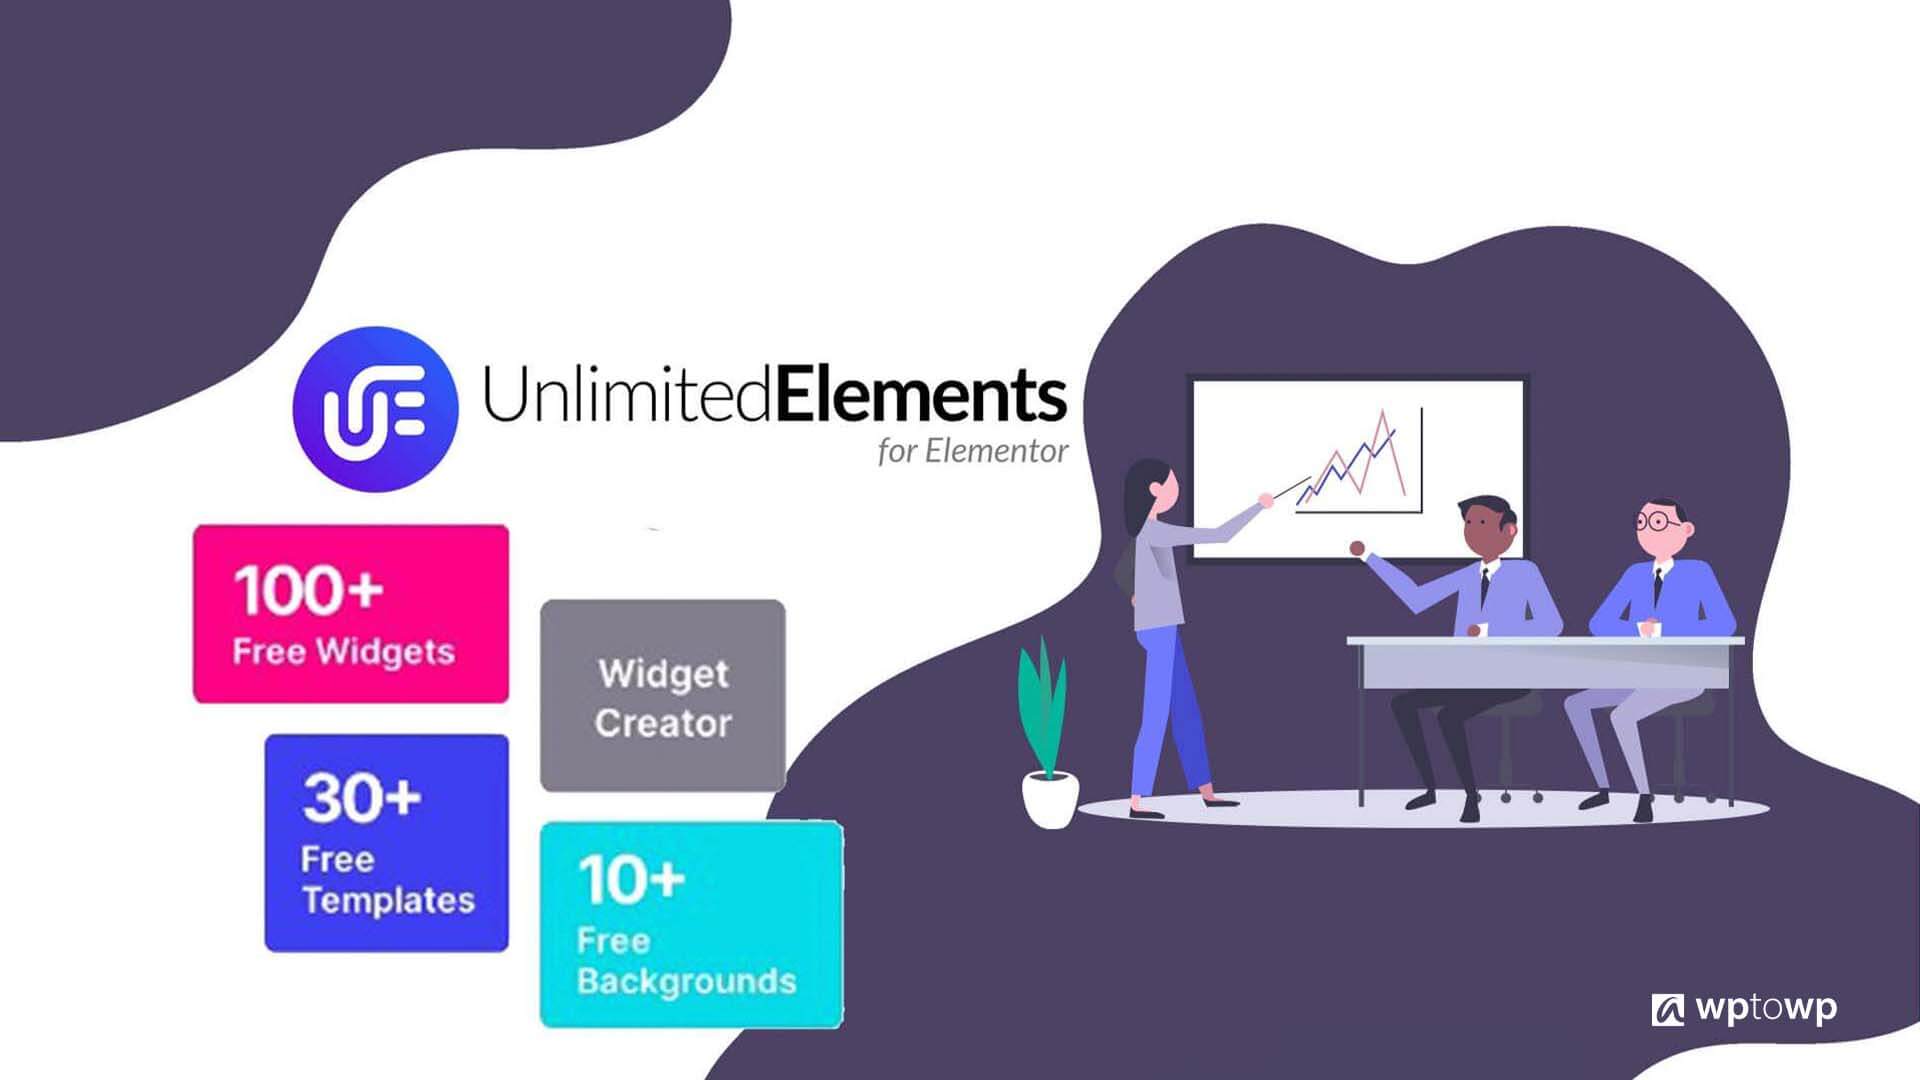 Unlimited Elements for Elementor, Wptowp